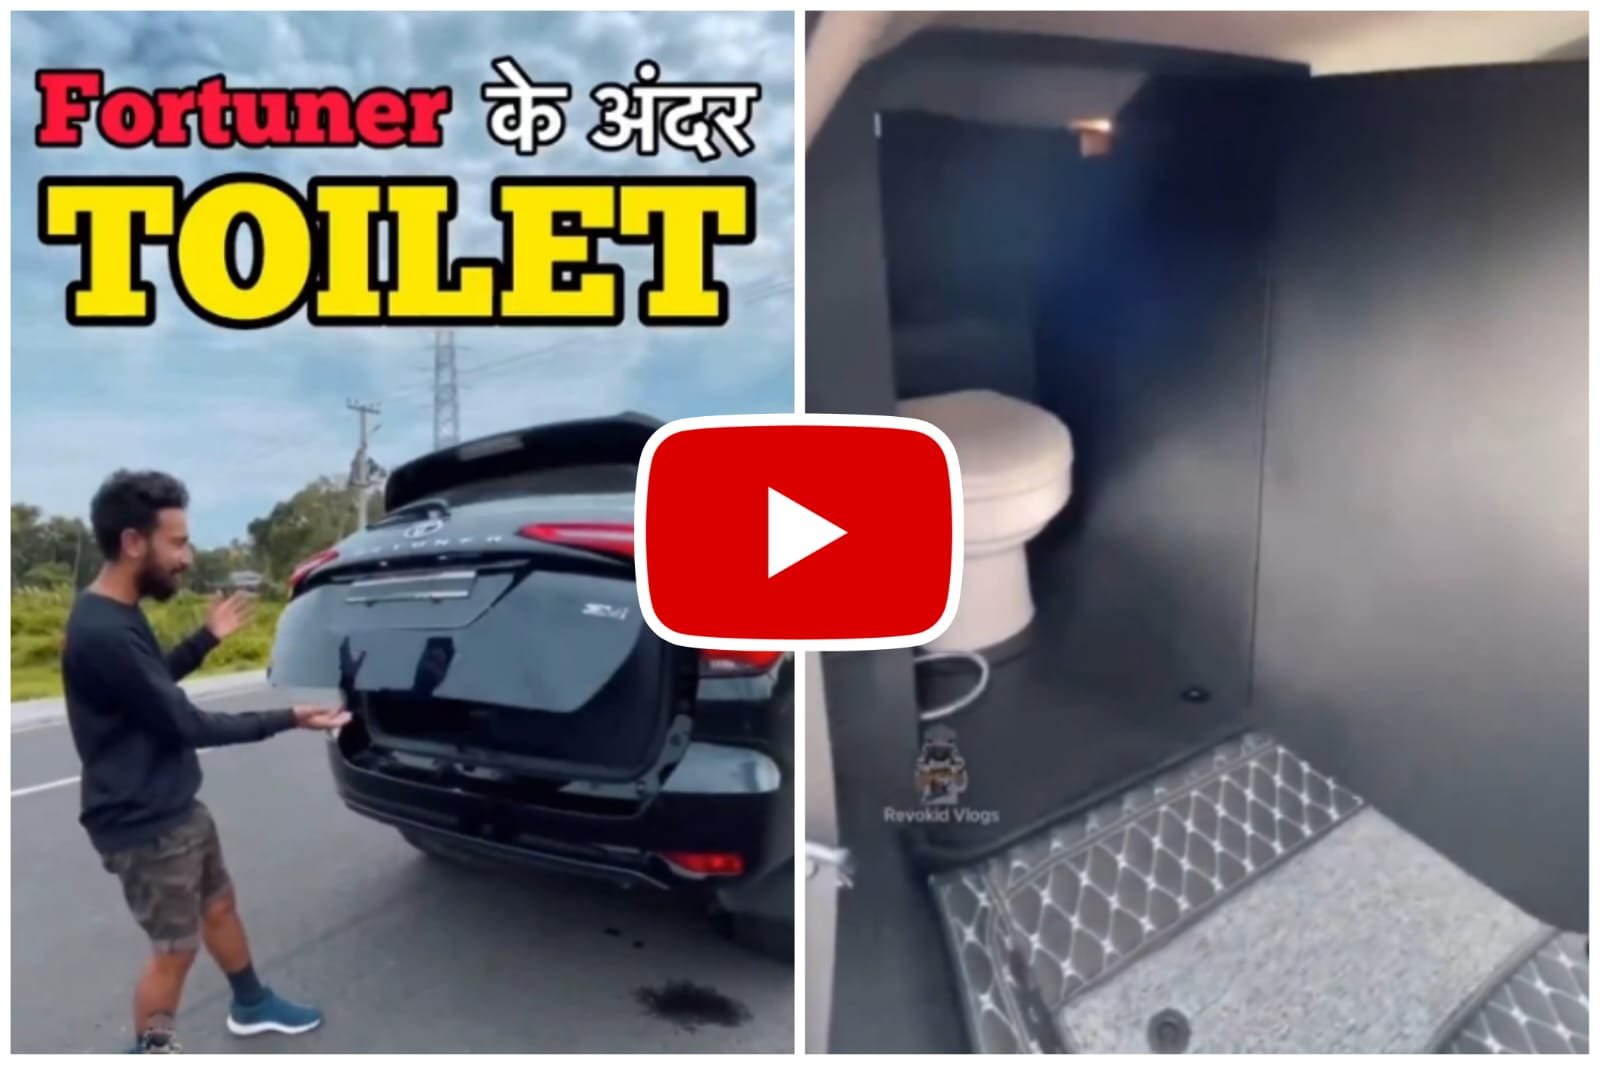 Jugaad Wali Car - The guy set the commode inside the car with Jugaad.